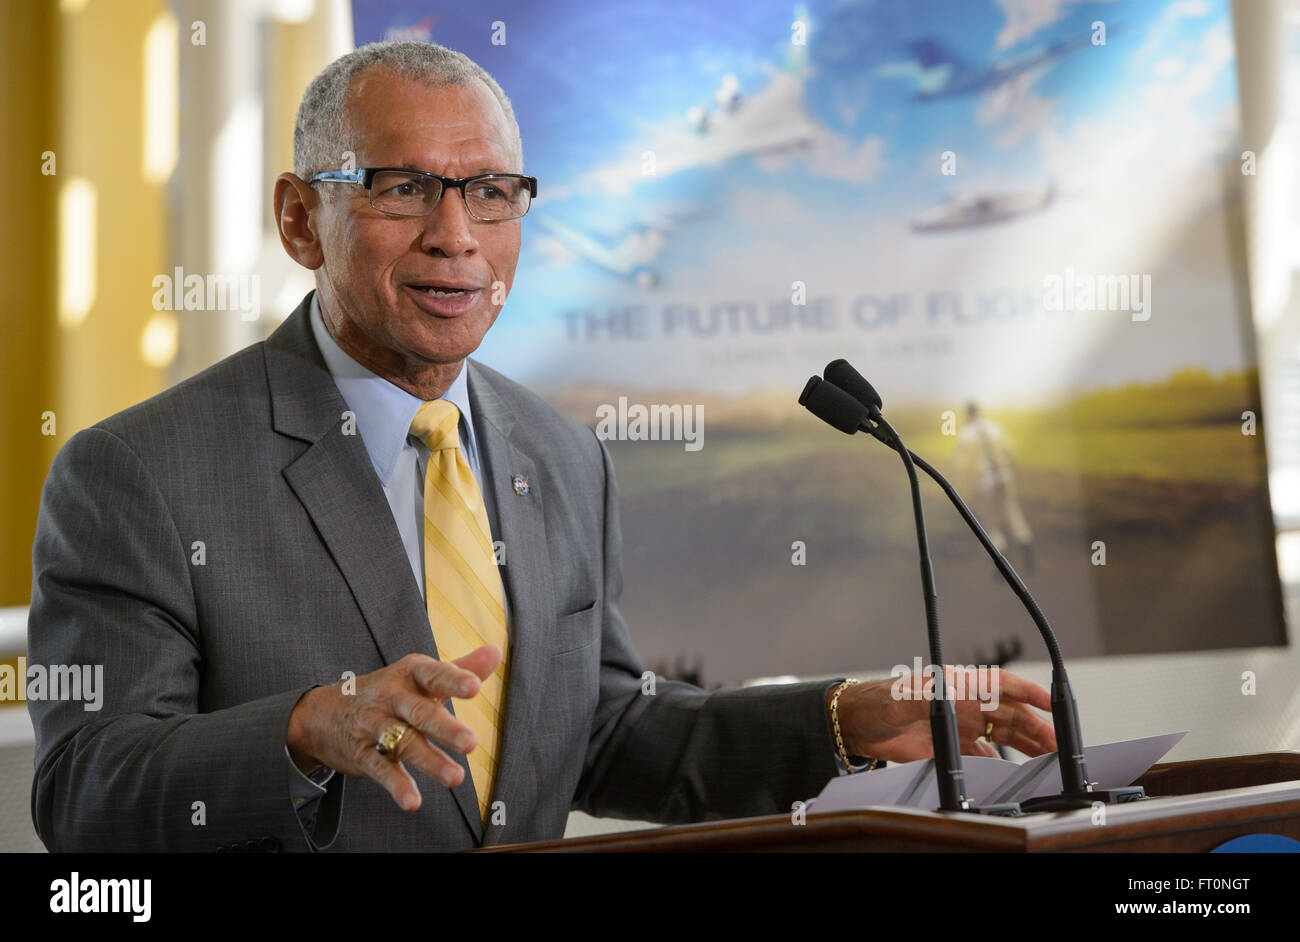 NASA Administrator Charles Bolden is seen during a press conference, Monday, Feb. 29, 2016 at Ronald Reagan Washington National Airport in Arlington, Va.  NASA Administrator Charles Bolden announced the award of a contract for the preliminary design of a &quot;low boom&quot; flight demonstration aircraft as part of NASA's New Aviation Horizons initiative that was introduced in the agency's Fiscal year 2017 budget.  Photo Credit: (NASA/Joel Kowsky) Stock Photo